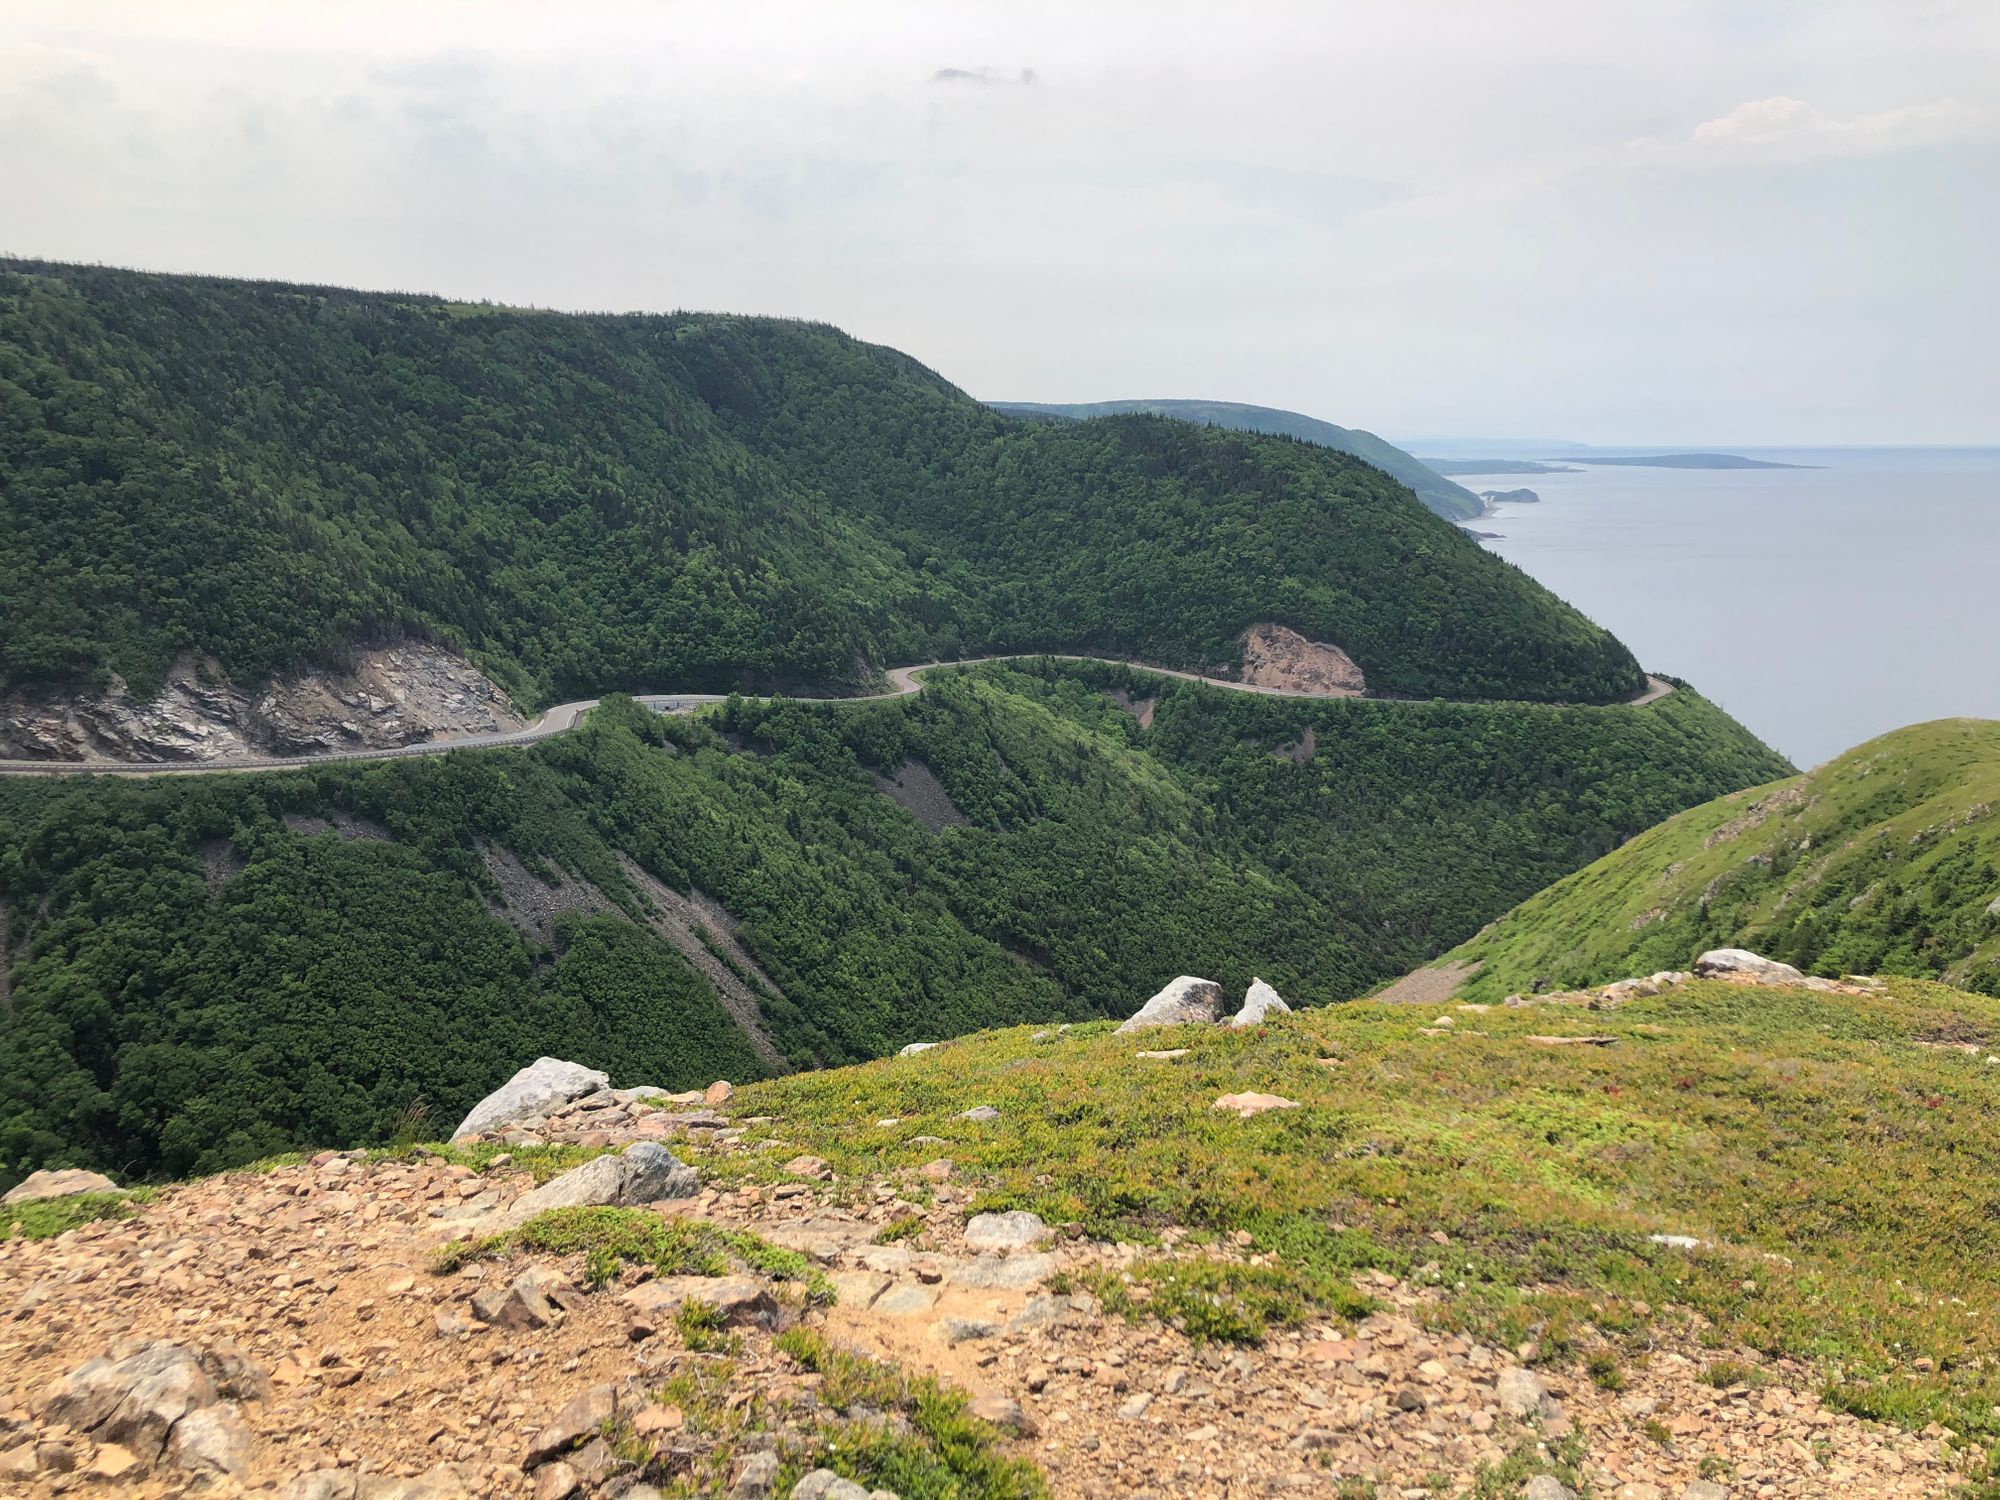 Skyline Trail in Cape Breton overlooking untouched, foliage-covered cliffs that roll for miles along the Atlantic Ocean